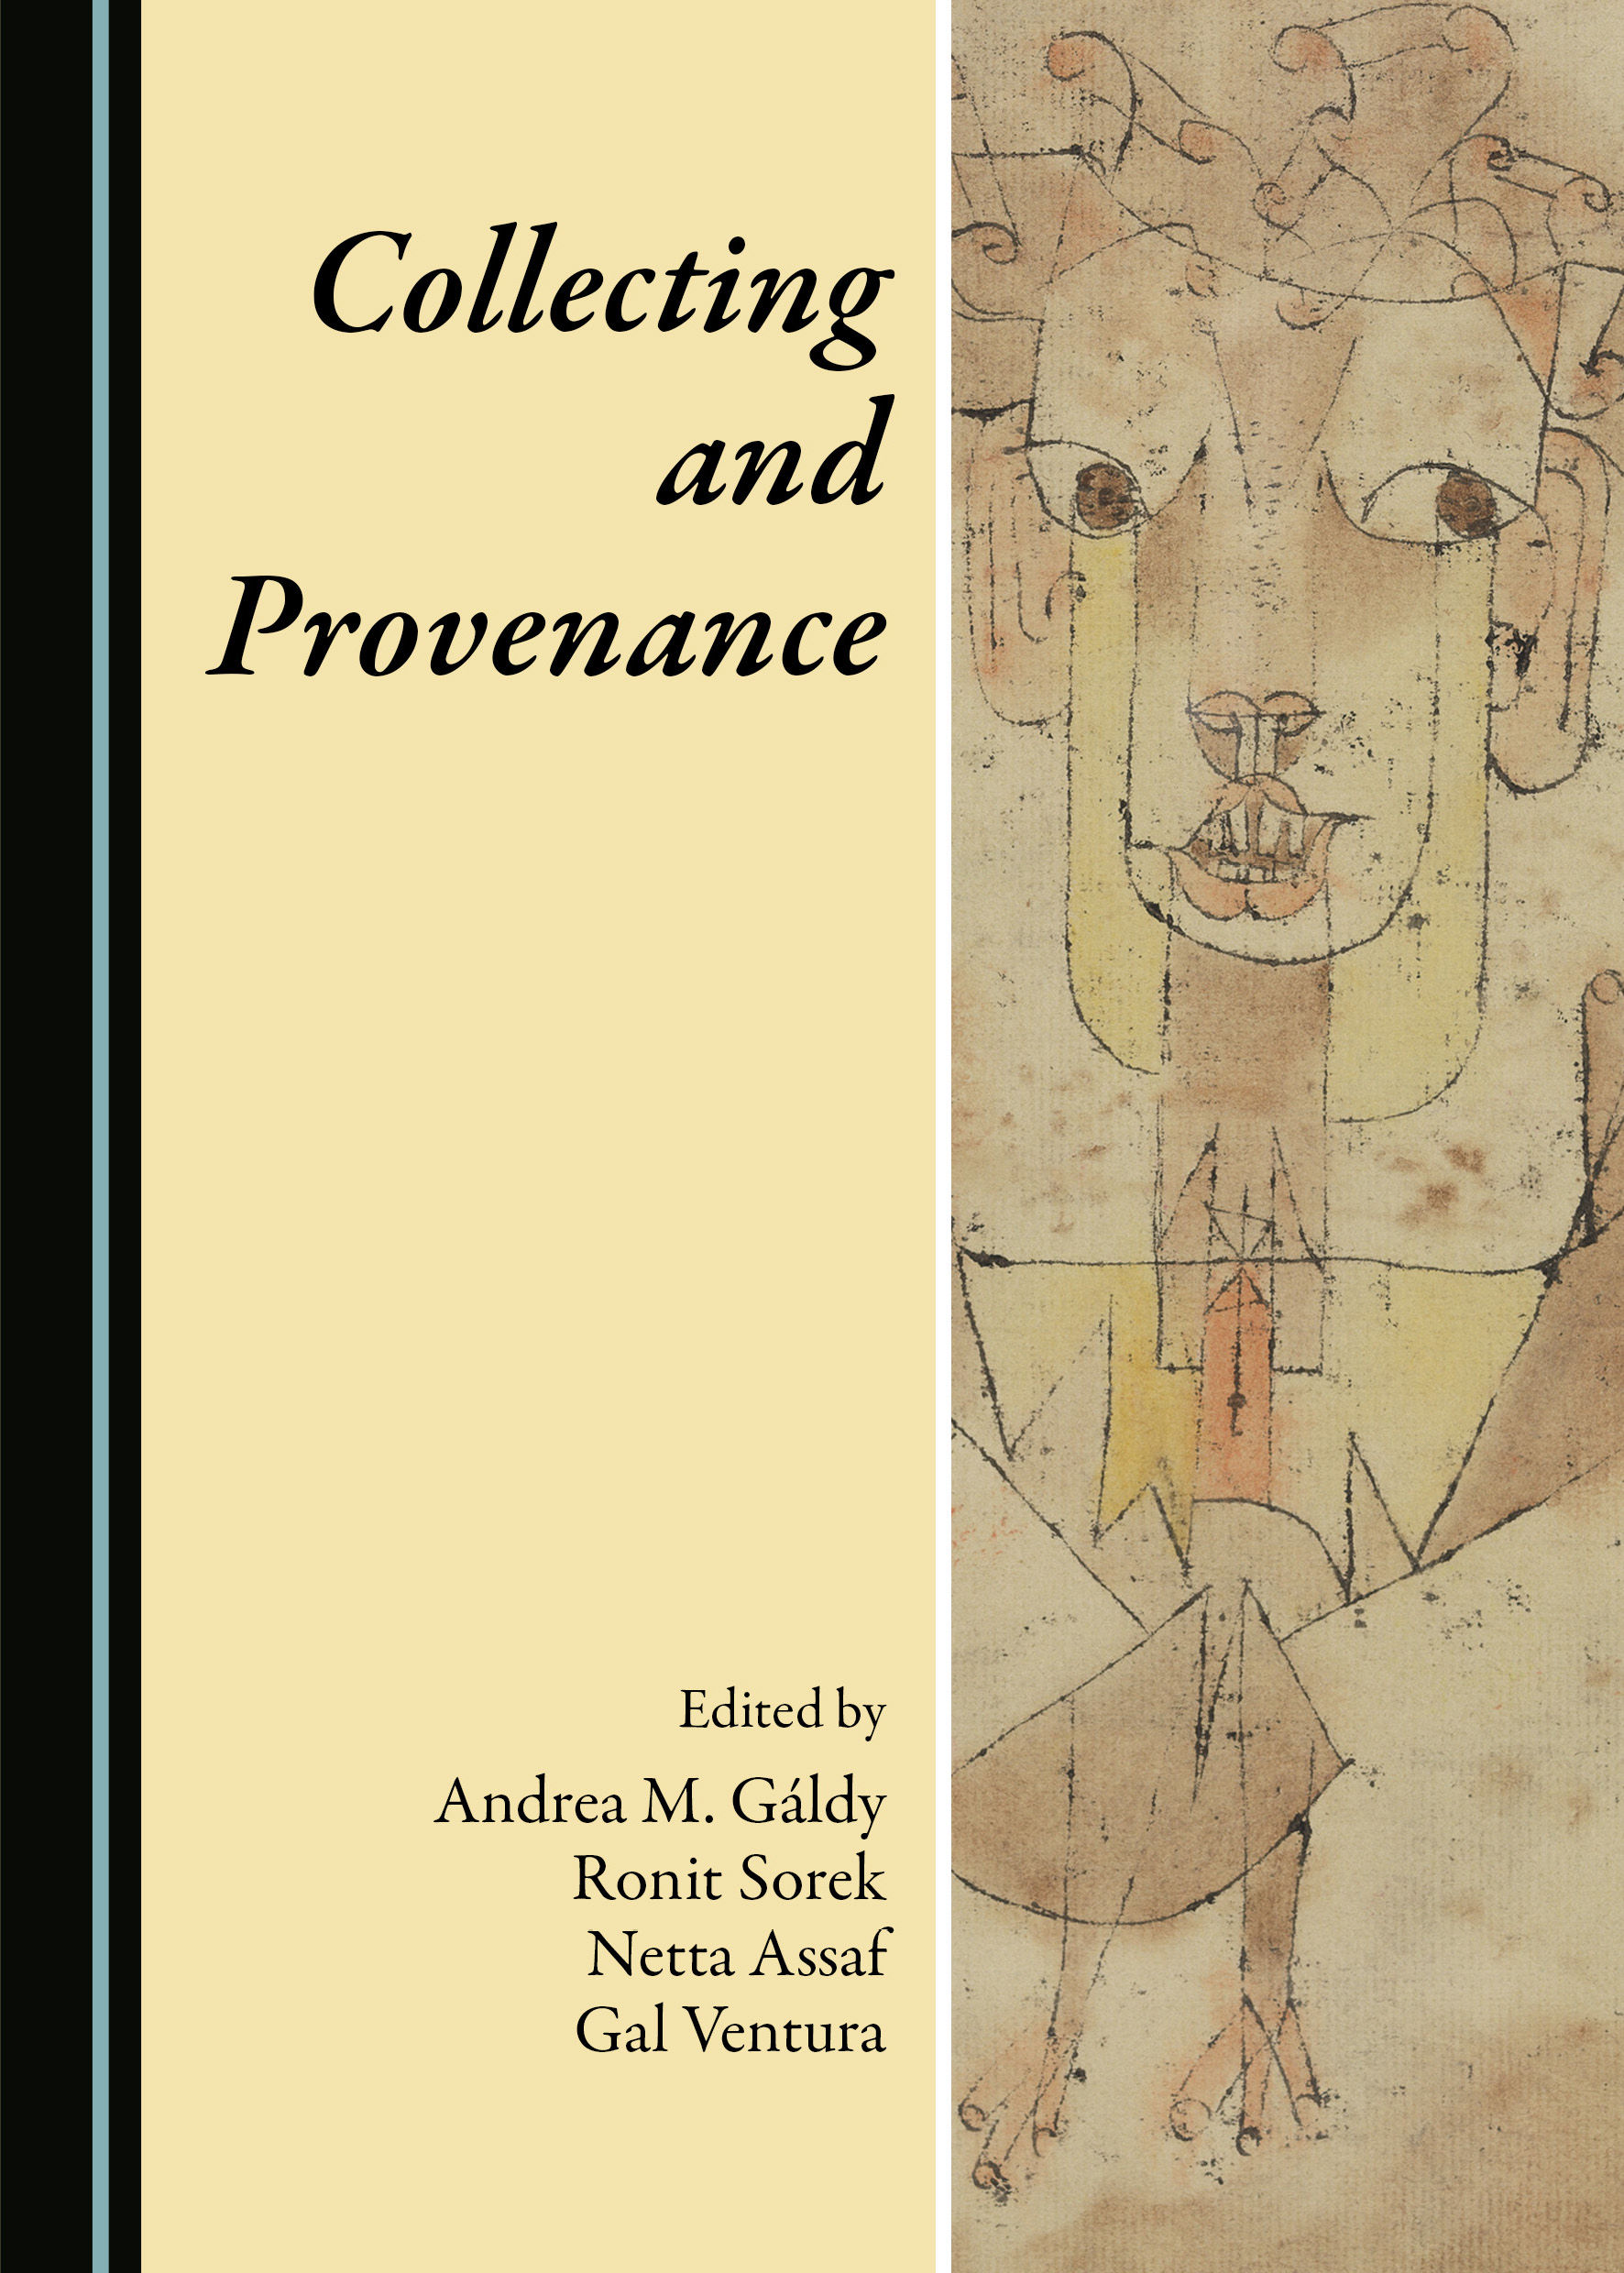 Cover of Collecting and Provenance with essay by Sara Angel.